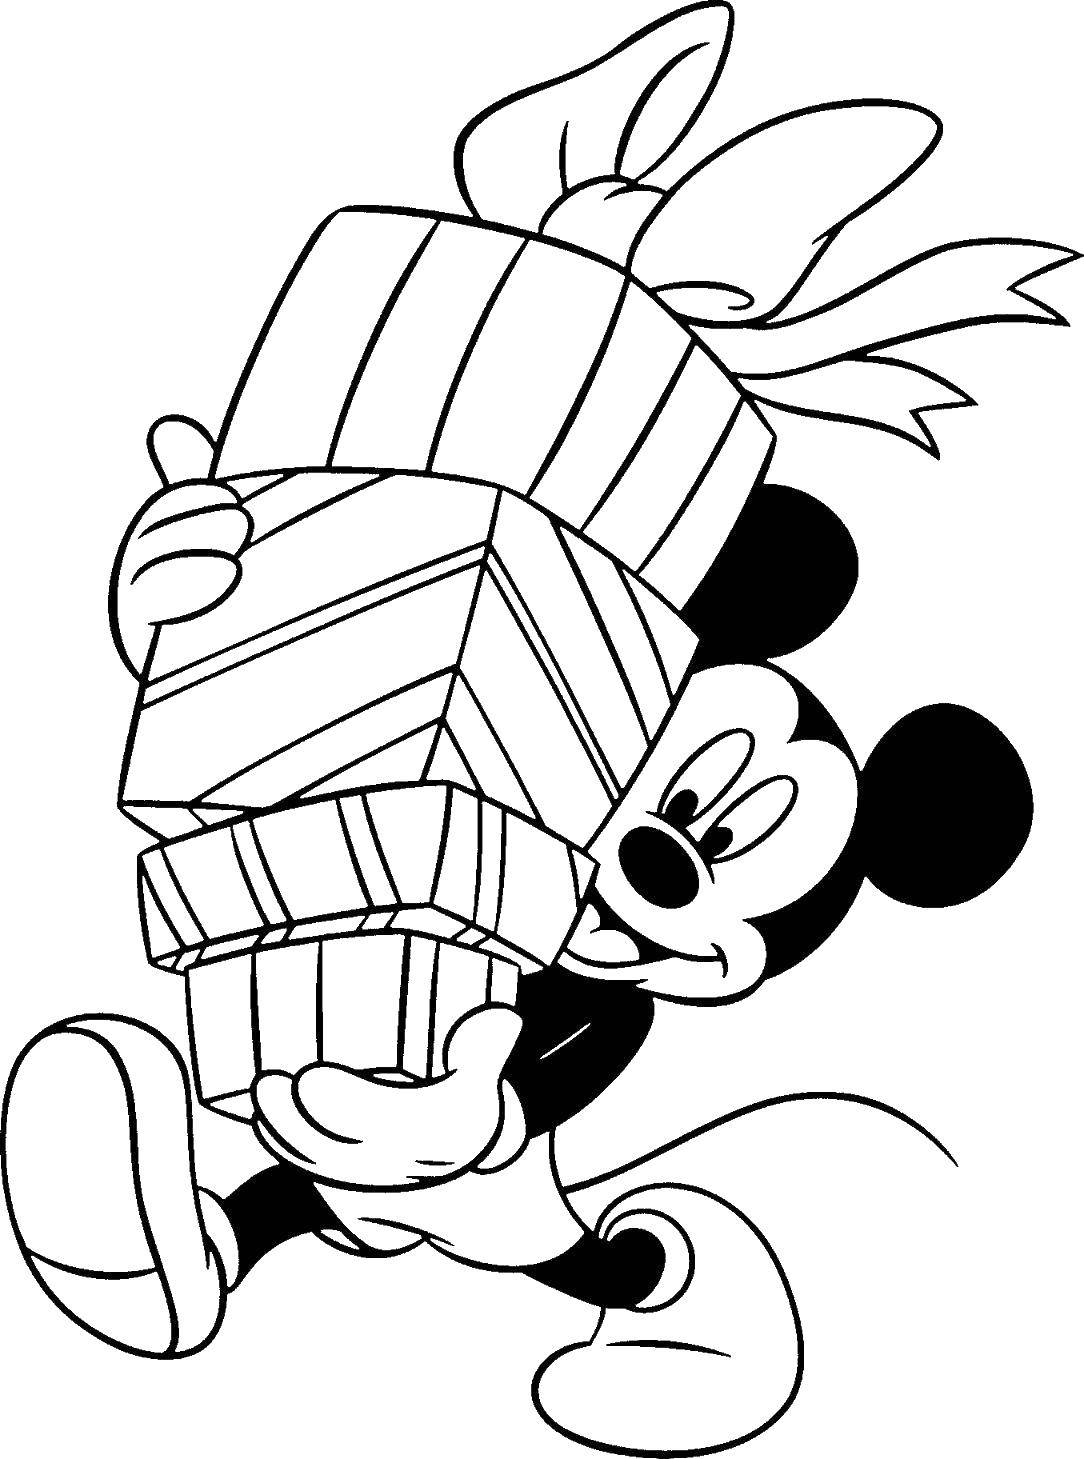 Coloring Mickey and gifts. Category Christmas. Tags:  Mickey, gifts, boxes.